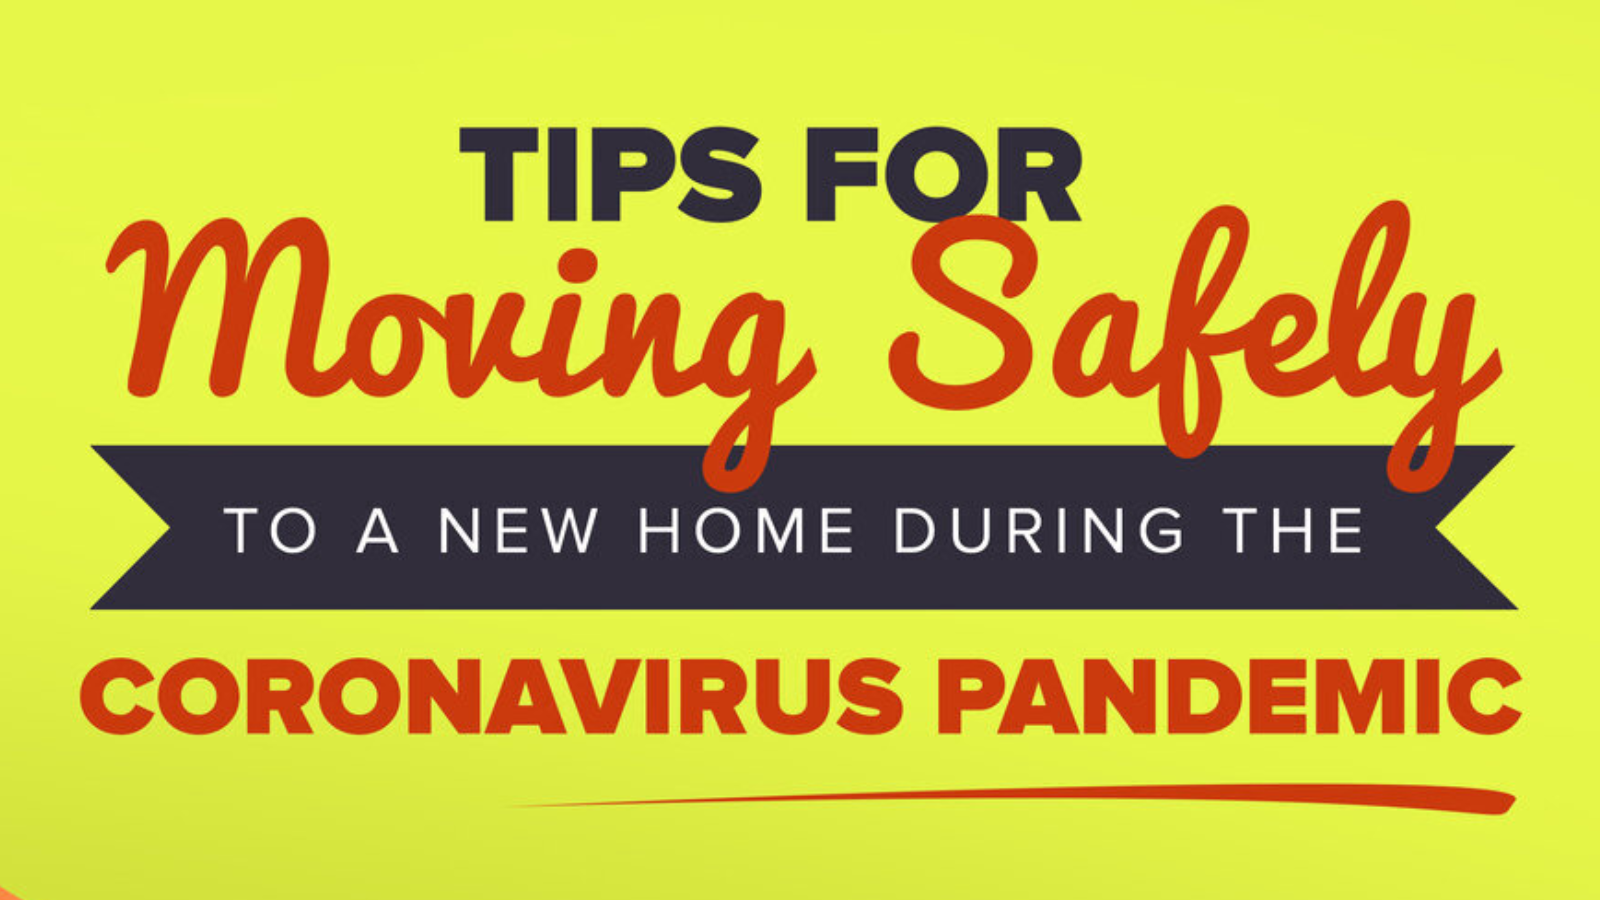 Tips for Moving Safely to a New Home During the Coronavirus Pandemic